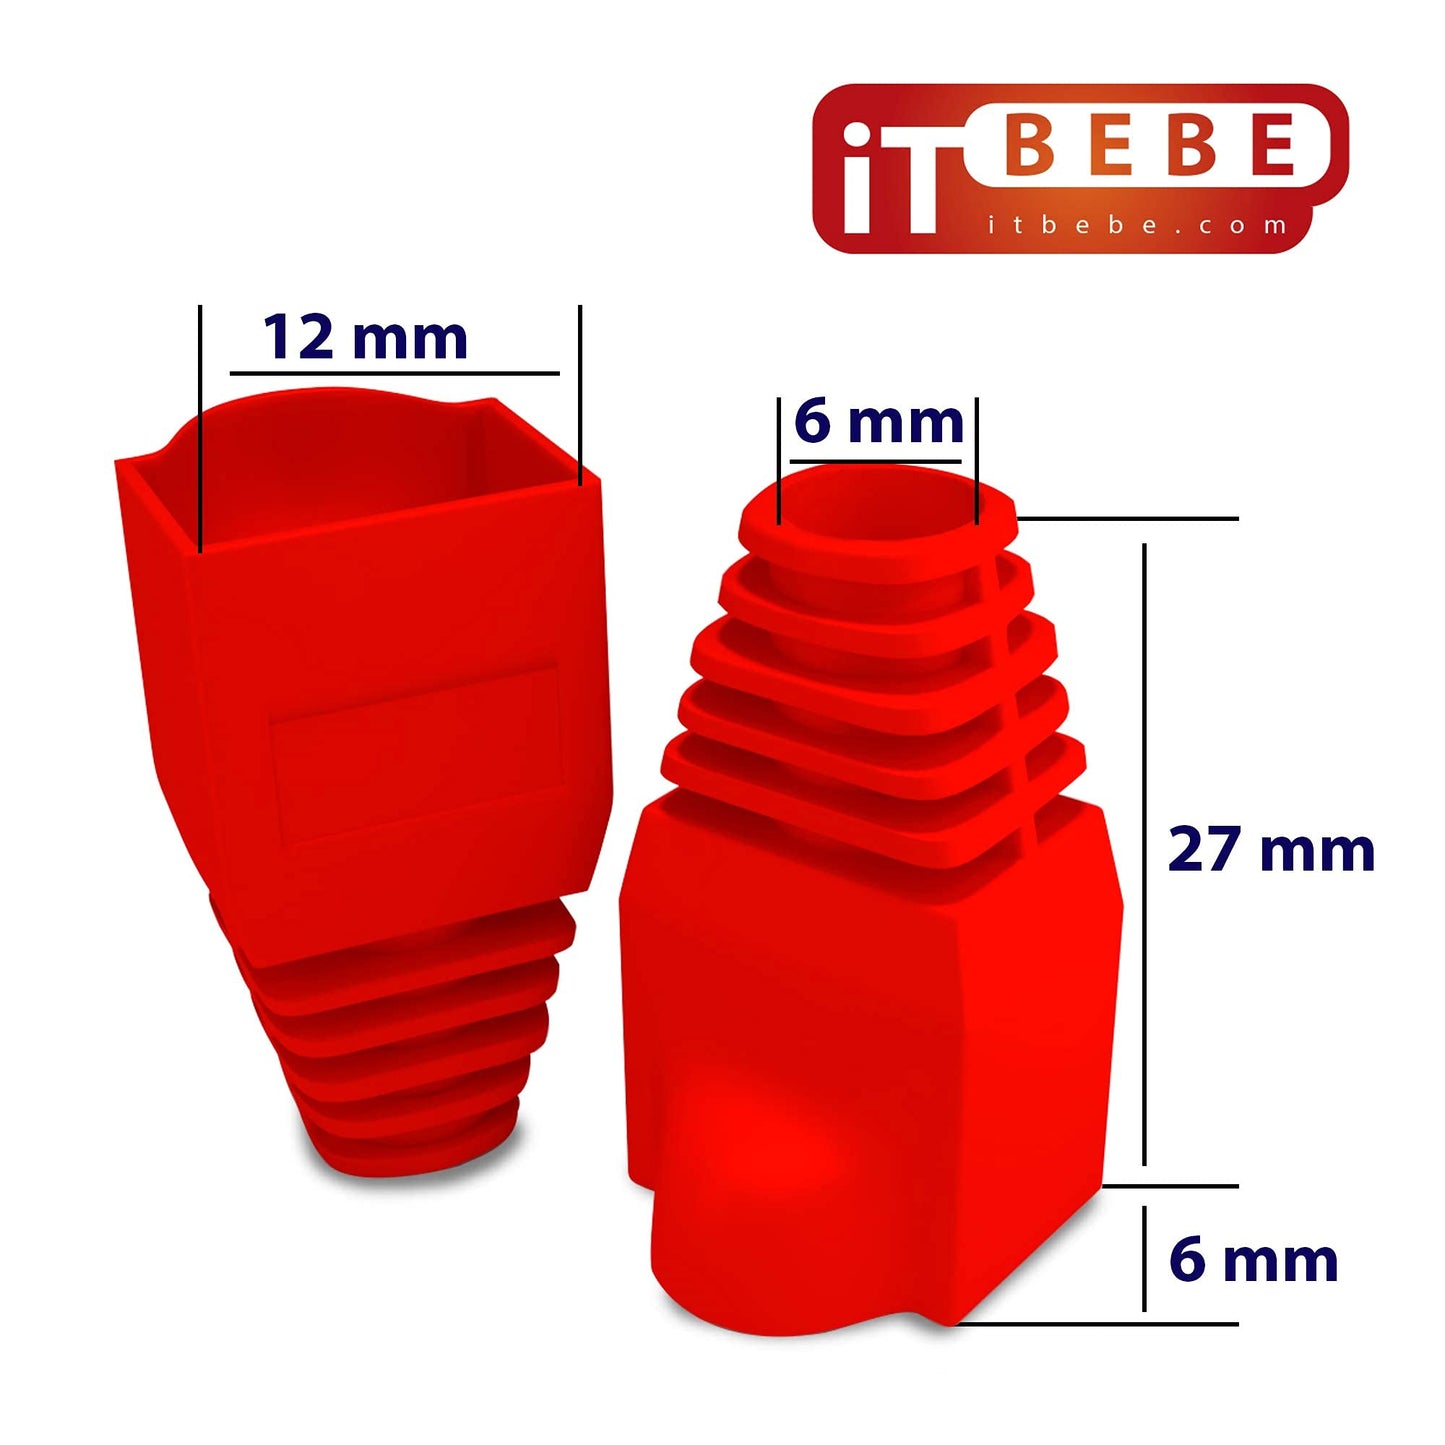 ITBEBE 100 Sets Gold Plated RJ45 Cat5 Cat5e Pass Through connectors and Red Strain Relief Boots for 8P8C UTP Passthrough cat5e Network Insert ethernet Plug for Unshielded Twisted Pair Cables